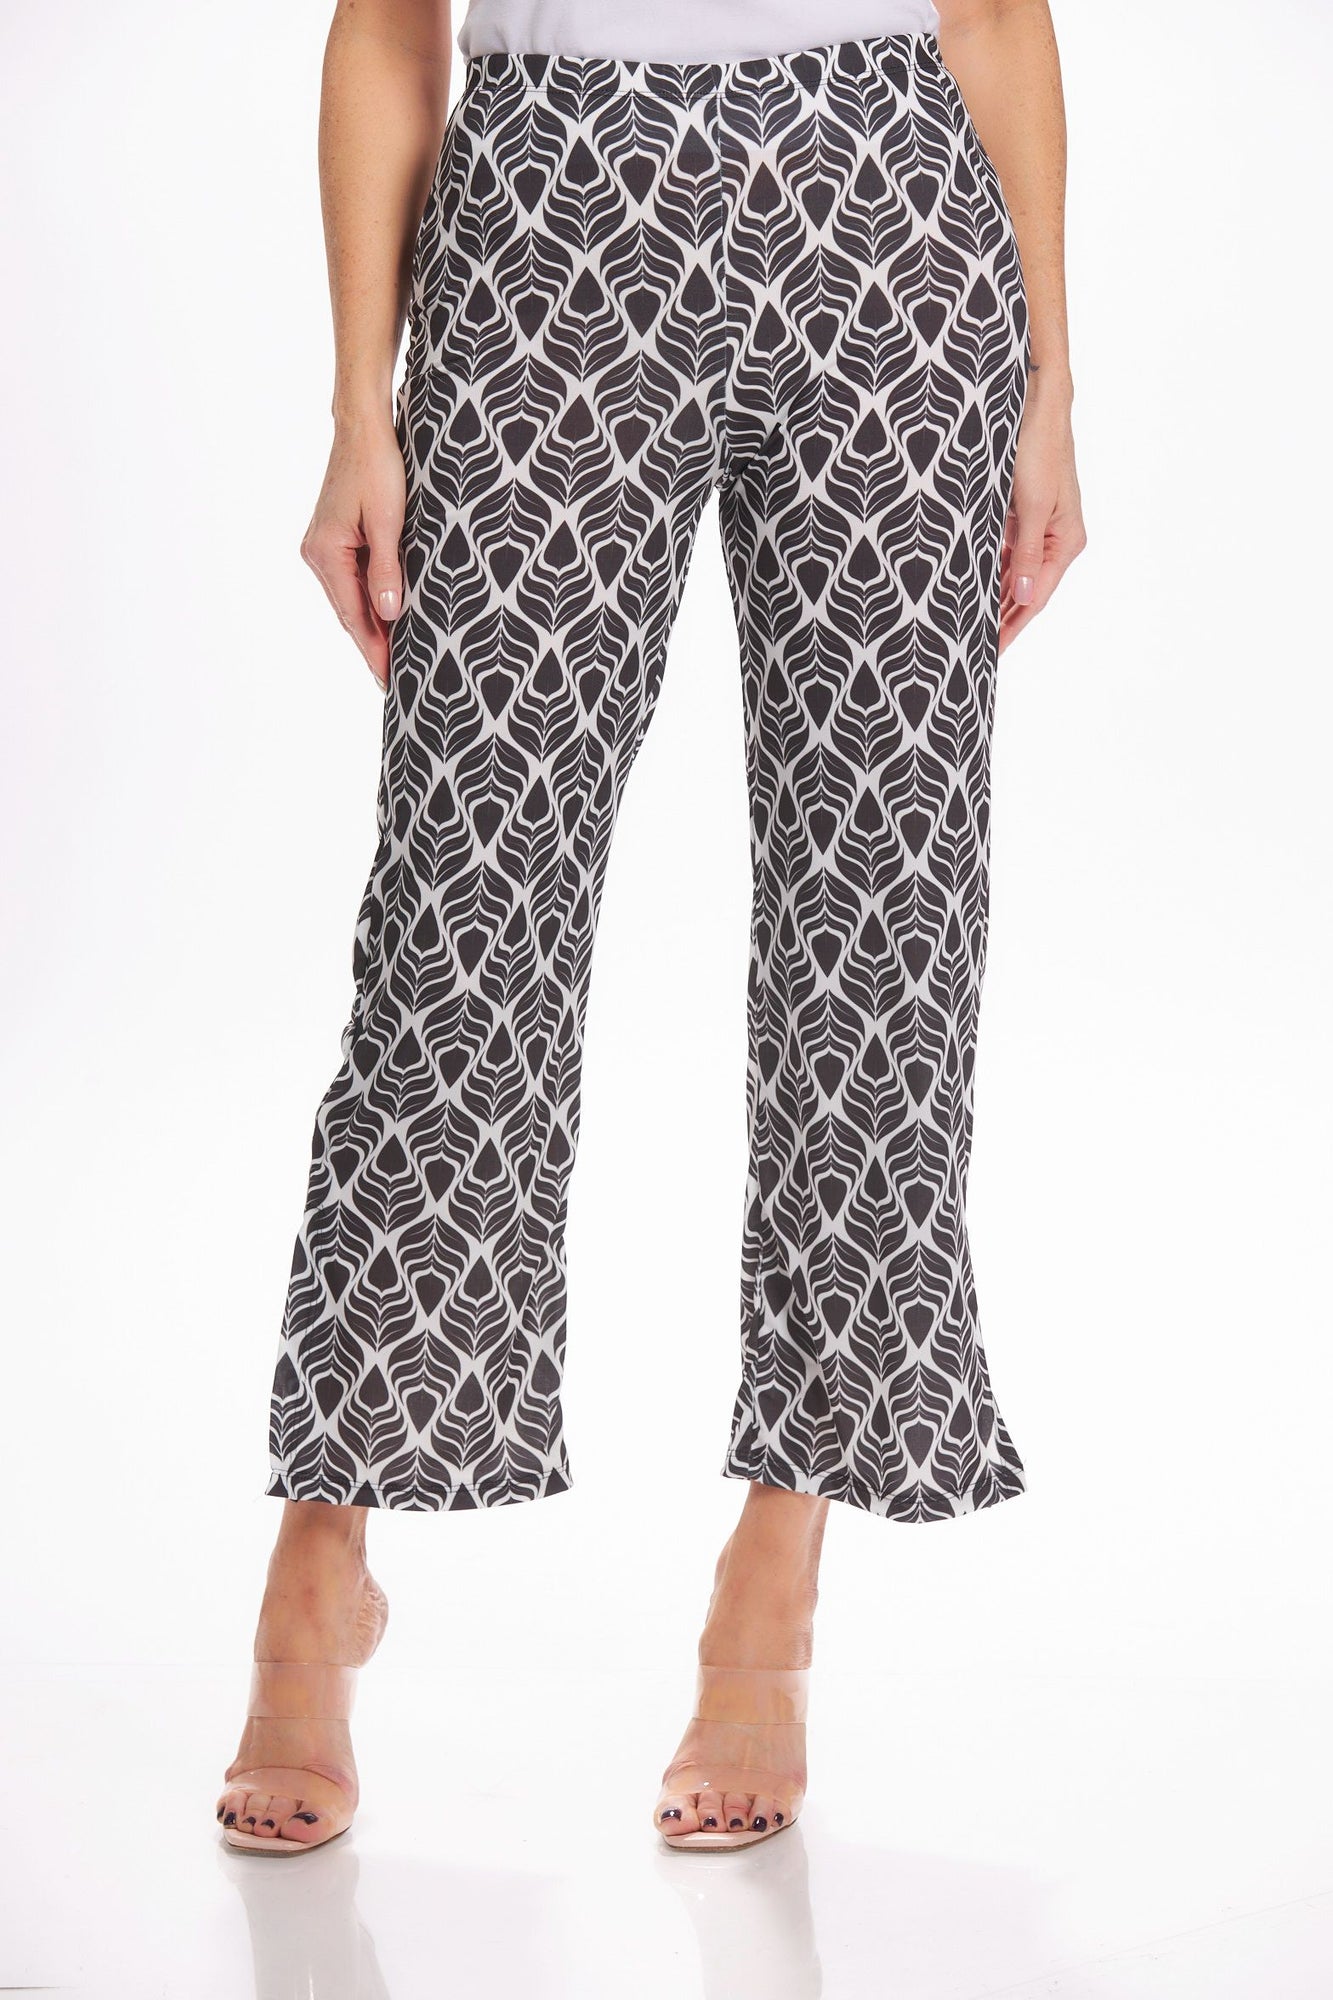 Printed Pants: How to Pull Them Off